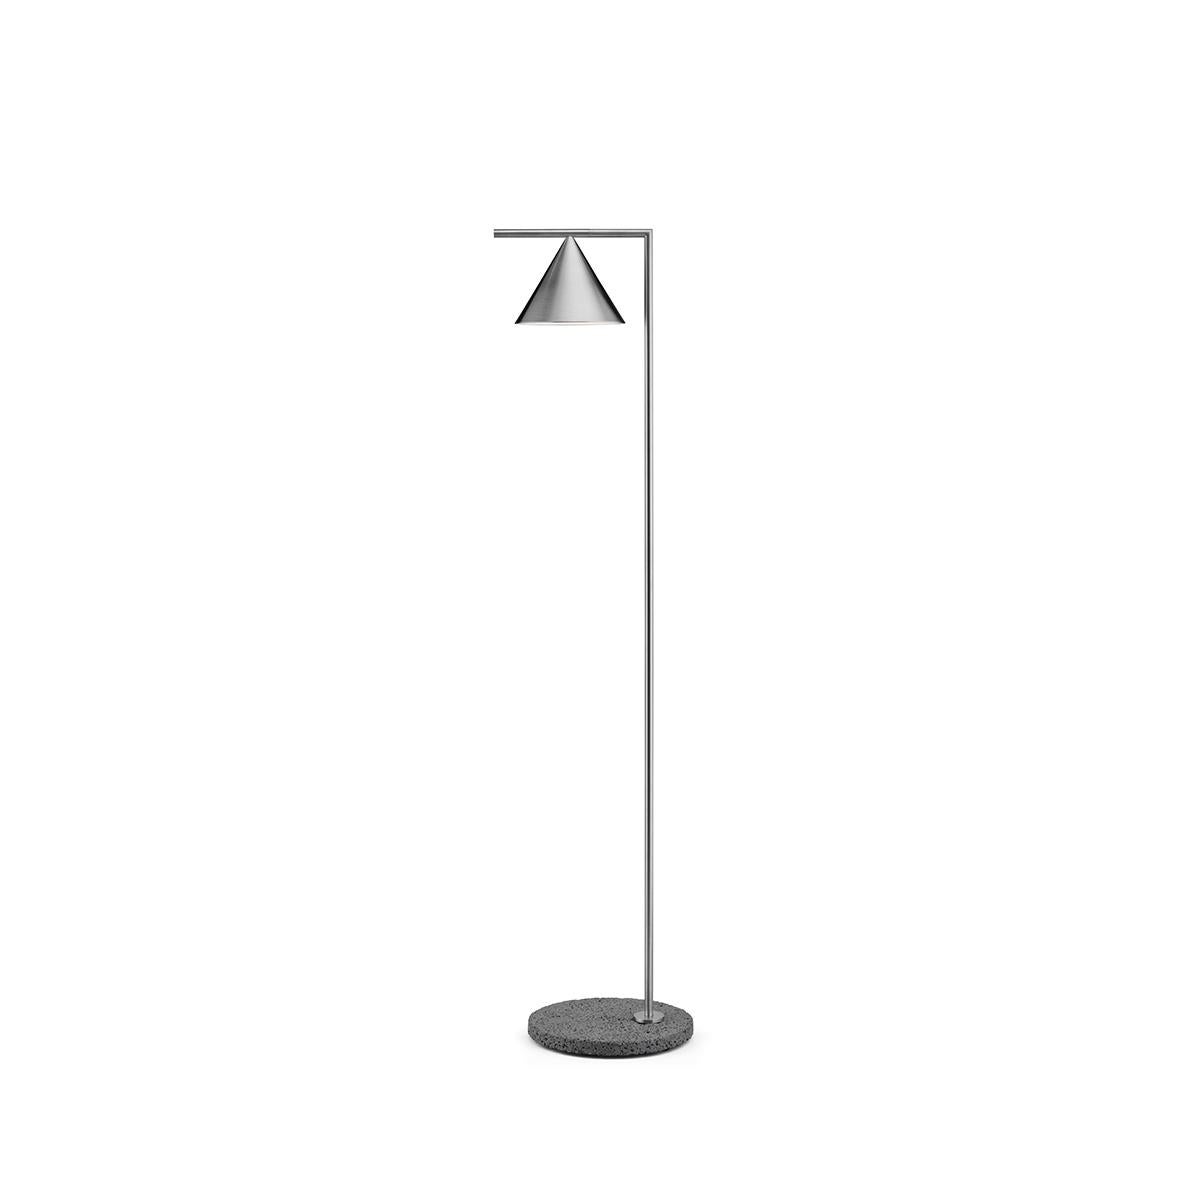 For Sale: Gray (Stainless Steel / Occhio di Pernice Base) Flos Captain Flint 3000K Outdoor Floor Lamp by Michael Anastassiades